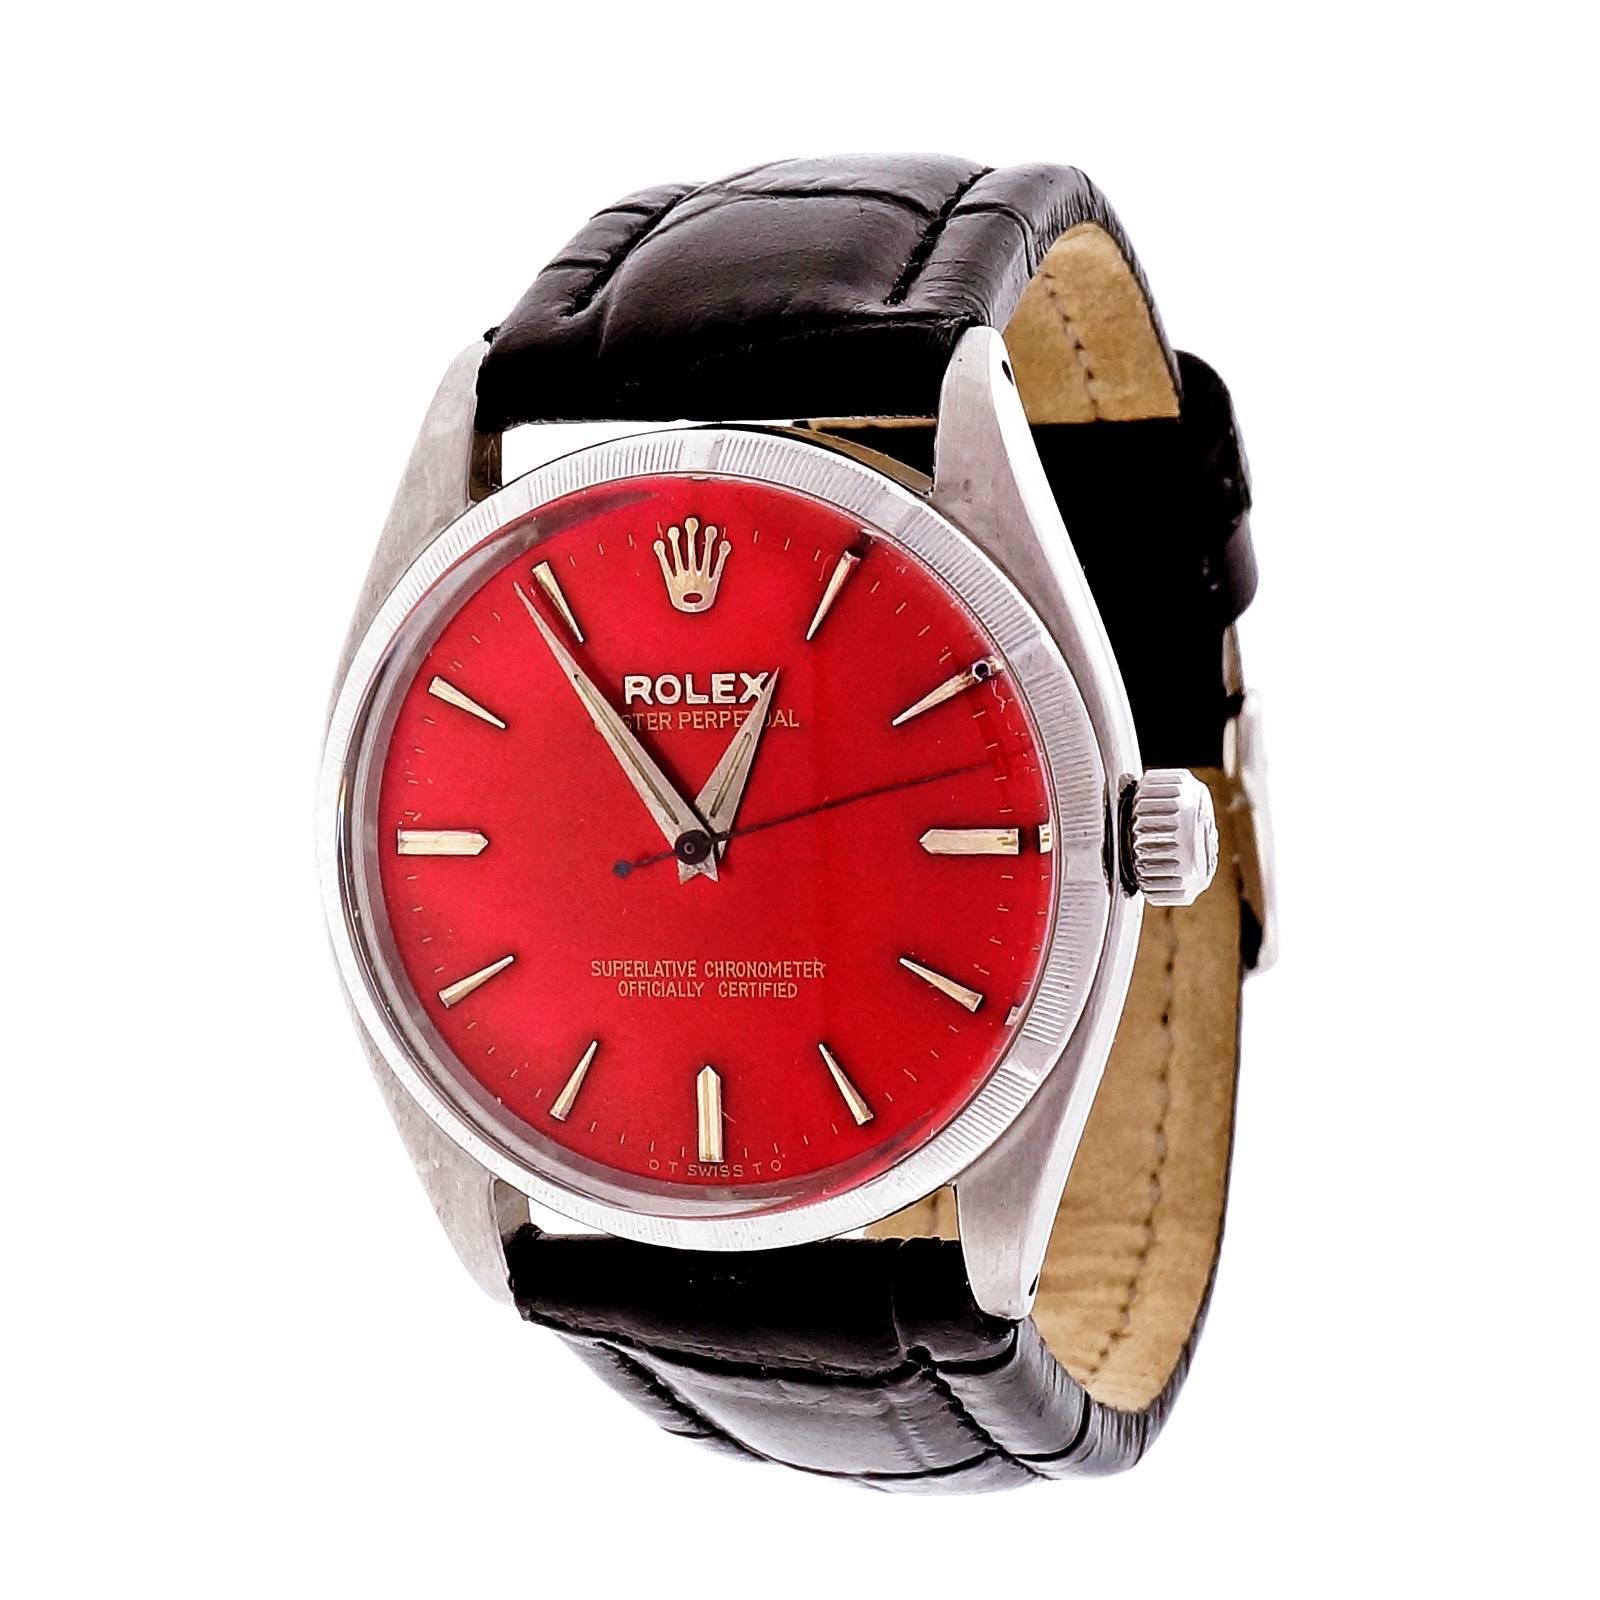 Rolex Stainless Steel Custom Colored Red Dial Wristwatch Ref 6565 2